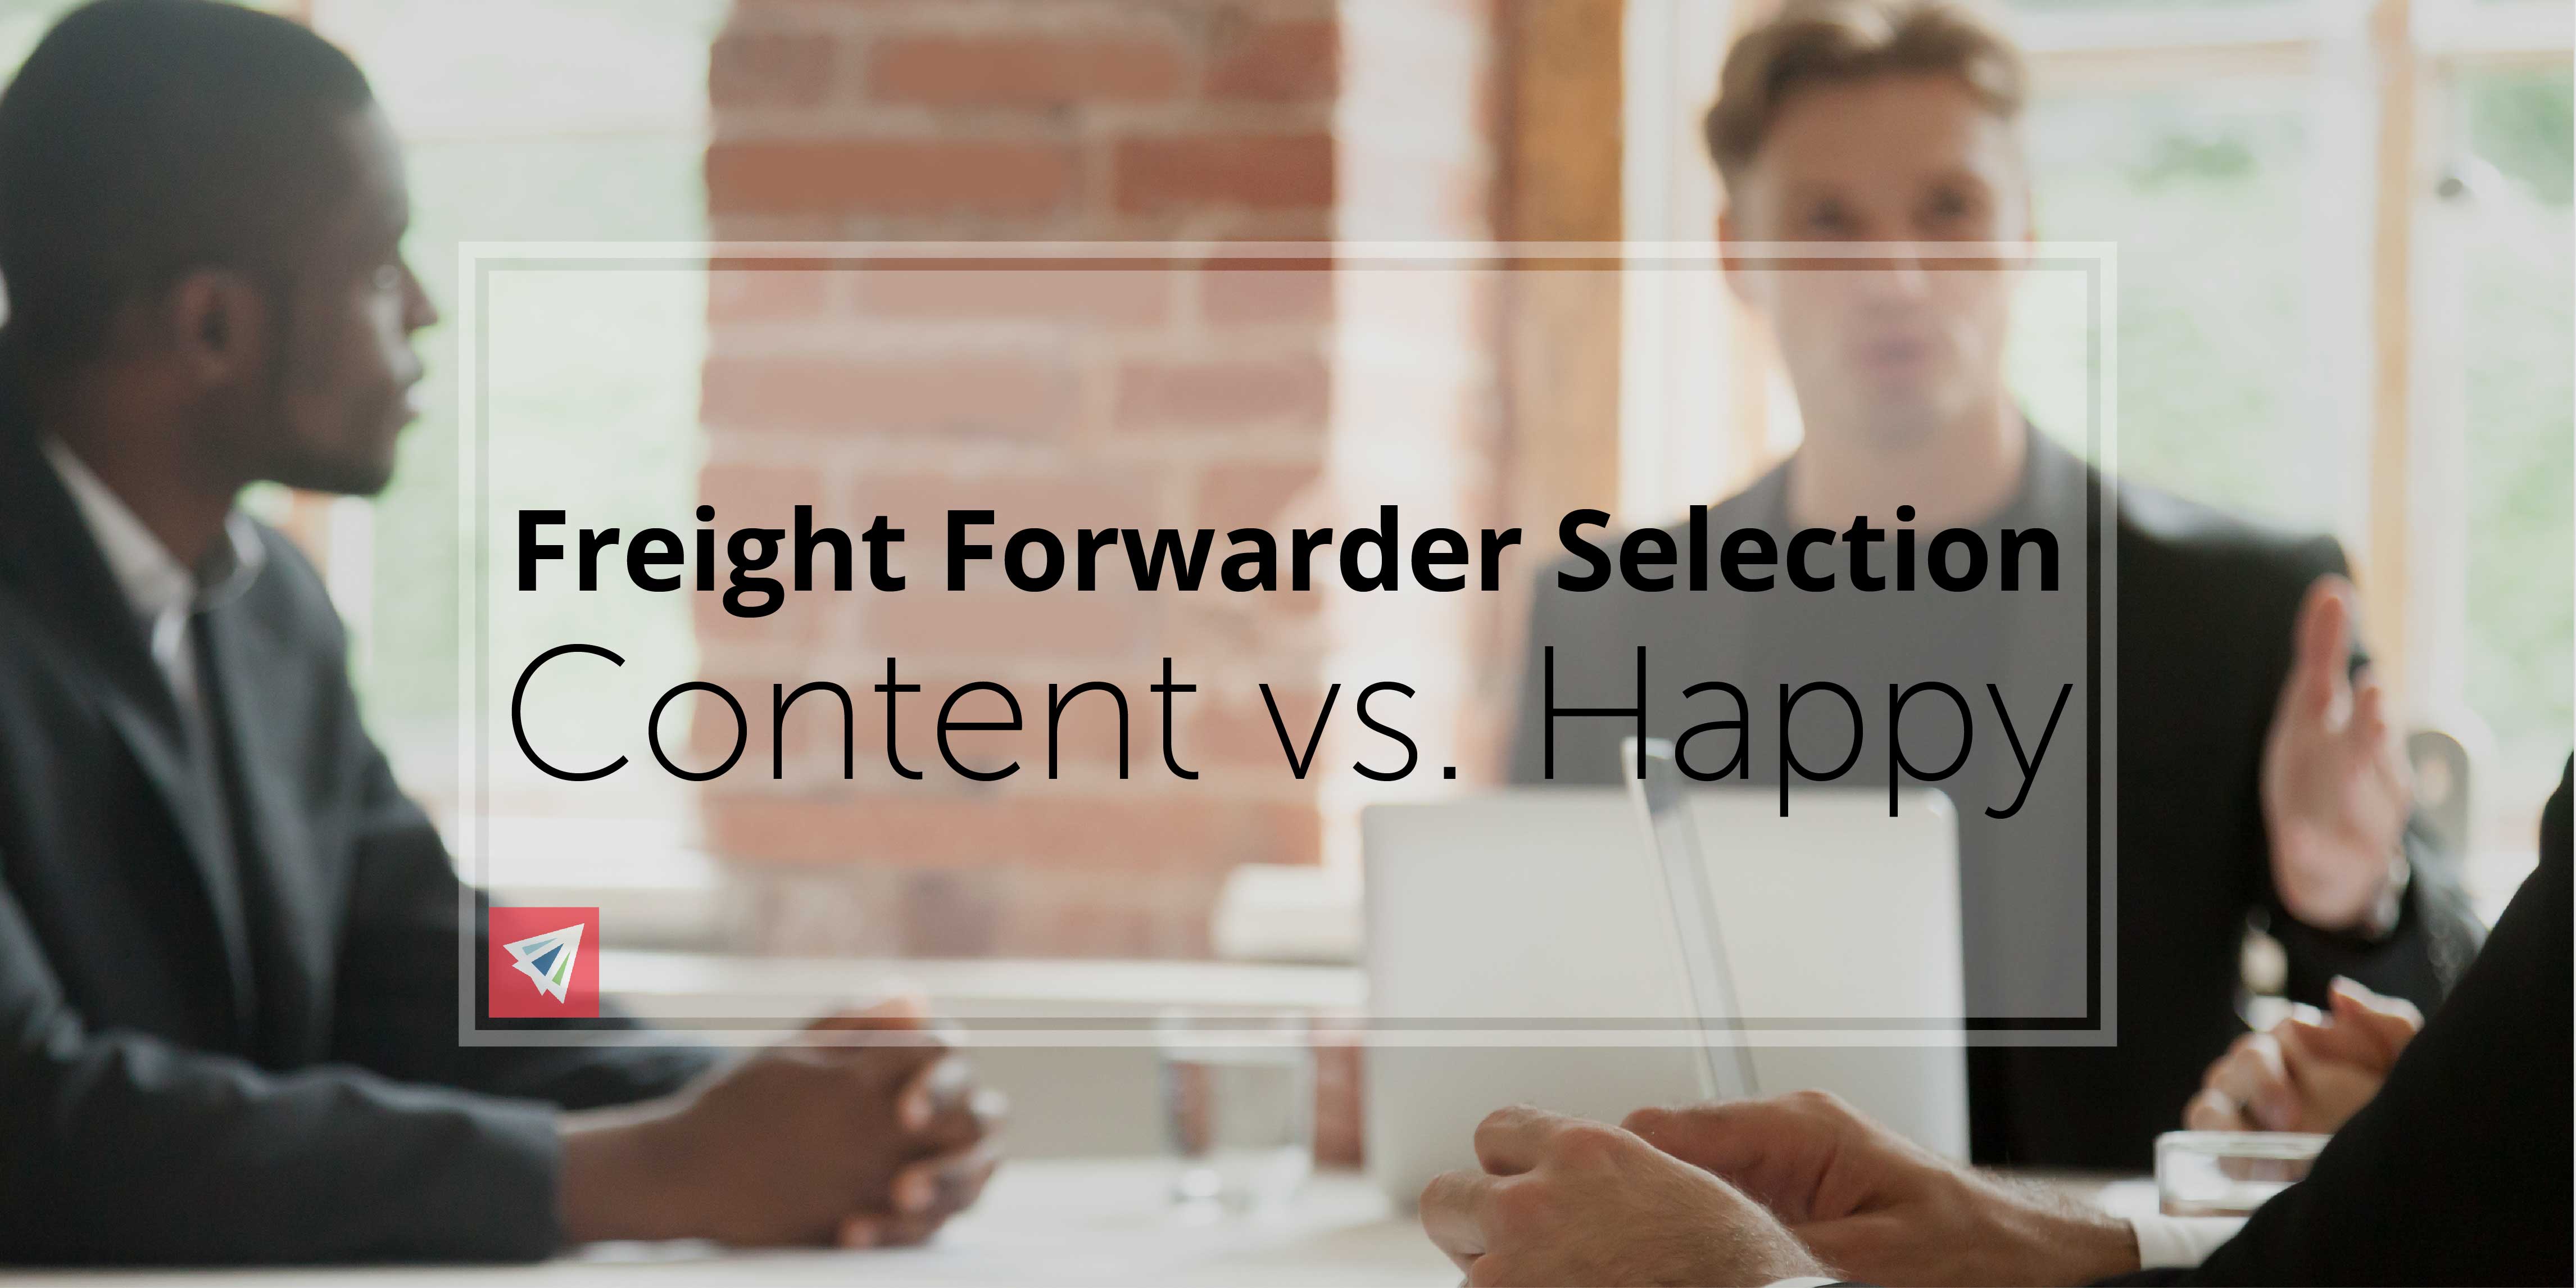 Freight Forwarder Selection - Content vs. Happy